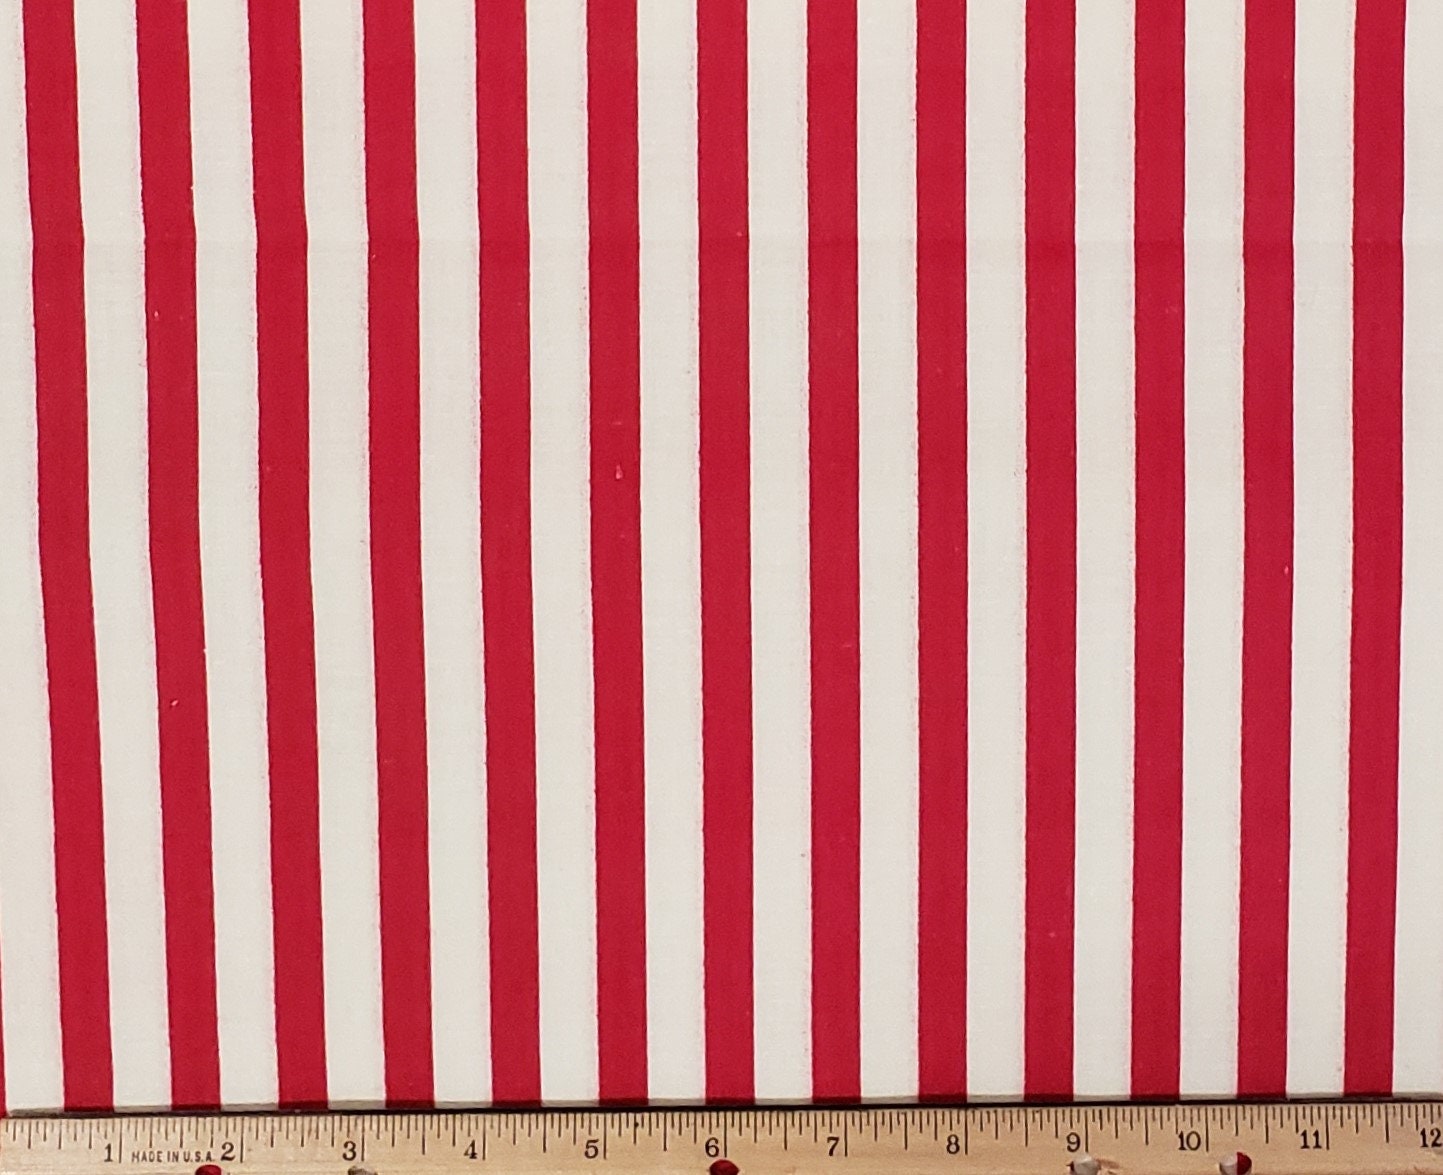 Stripe Fabric - Red and Cream - Selvage to Selvage Print